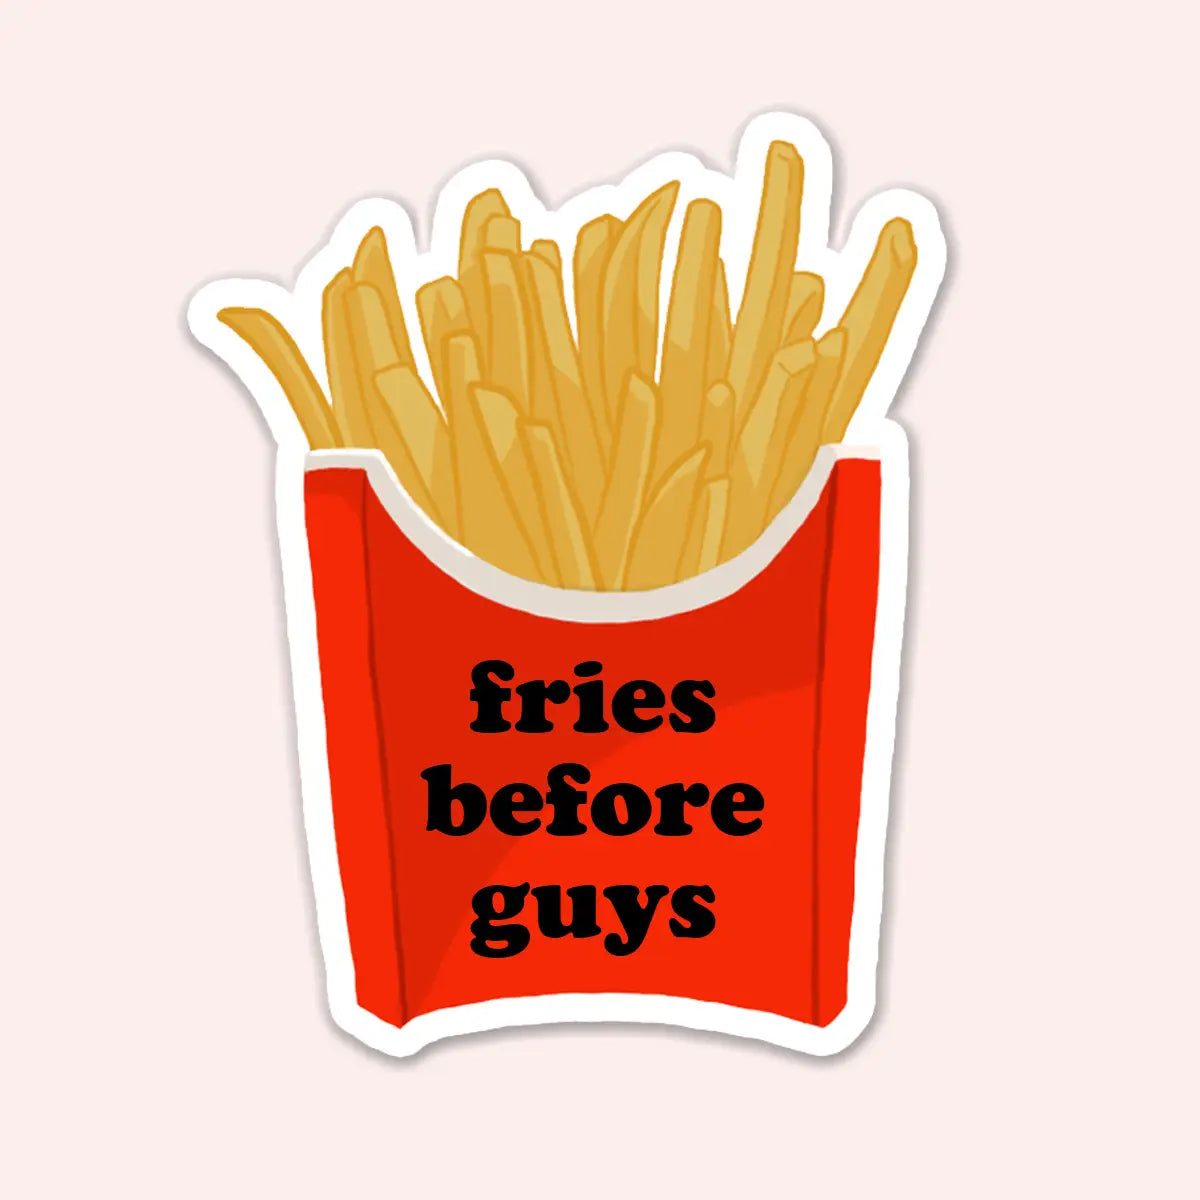 Fries before guys sticker waterproof made in the USA woman-owned business gift for her friend Modern smart causal female chic effortless outfit womens ladies gift elegant effortless clothing everyday stylish clothes apparel outfits chic winter summer style women’s boutique trendy teacher office cute outfit boutique clothes fashion quality work from home coastal beachy lounge athleisure gift for her midsize curvy sizes 